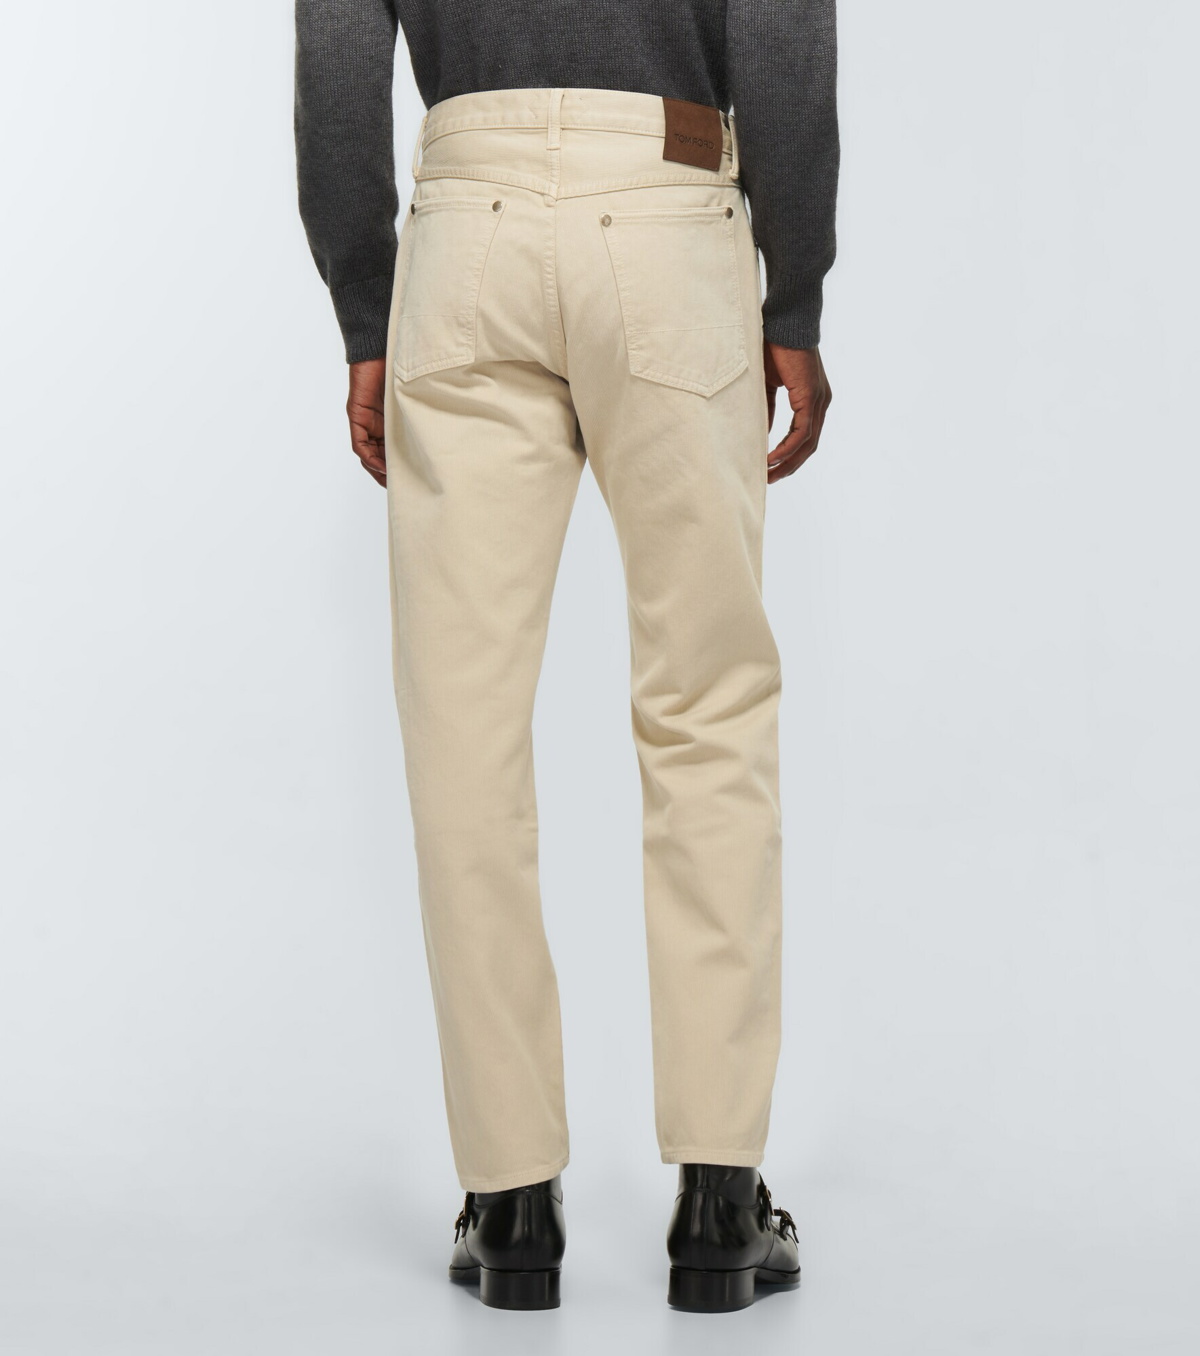 Tom Ford - Tapered corduroy pants TOM FORD